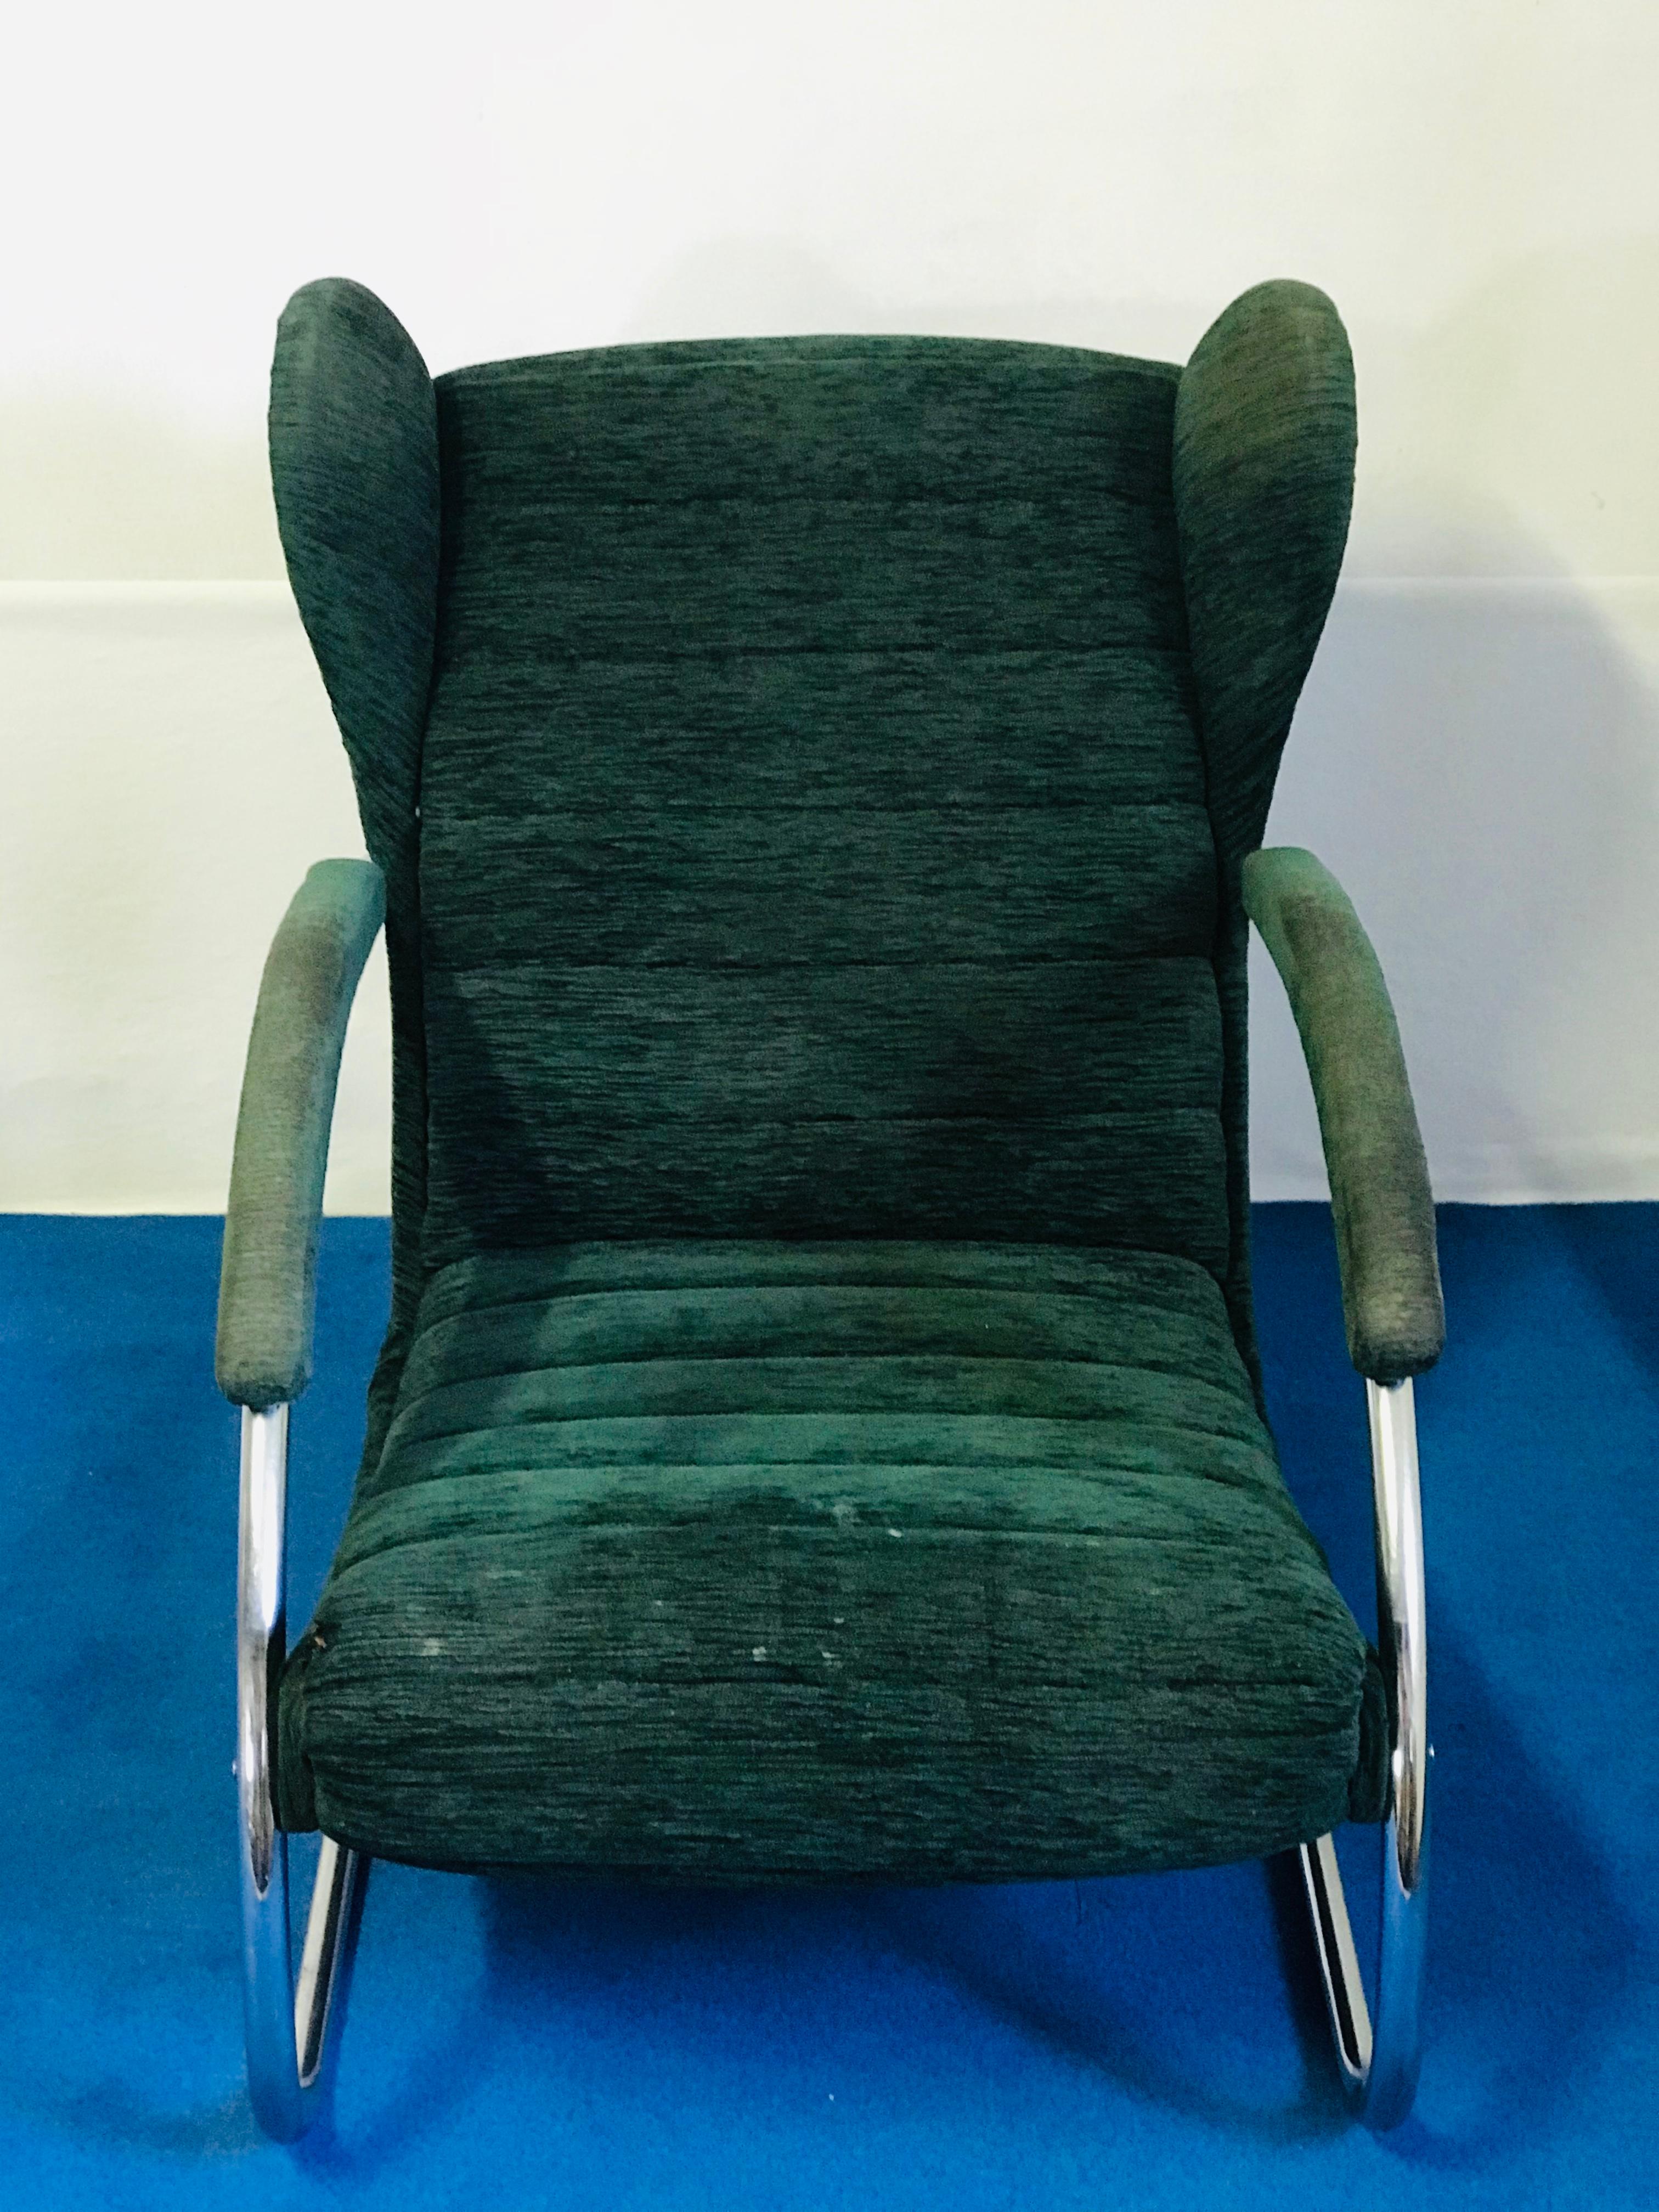 The chair is in the origin condition. It is suitable for upholstery. The construction is chrome (95%) and original condition too.